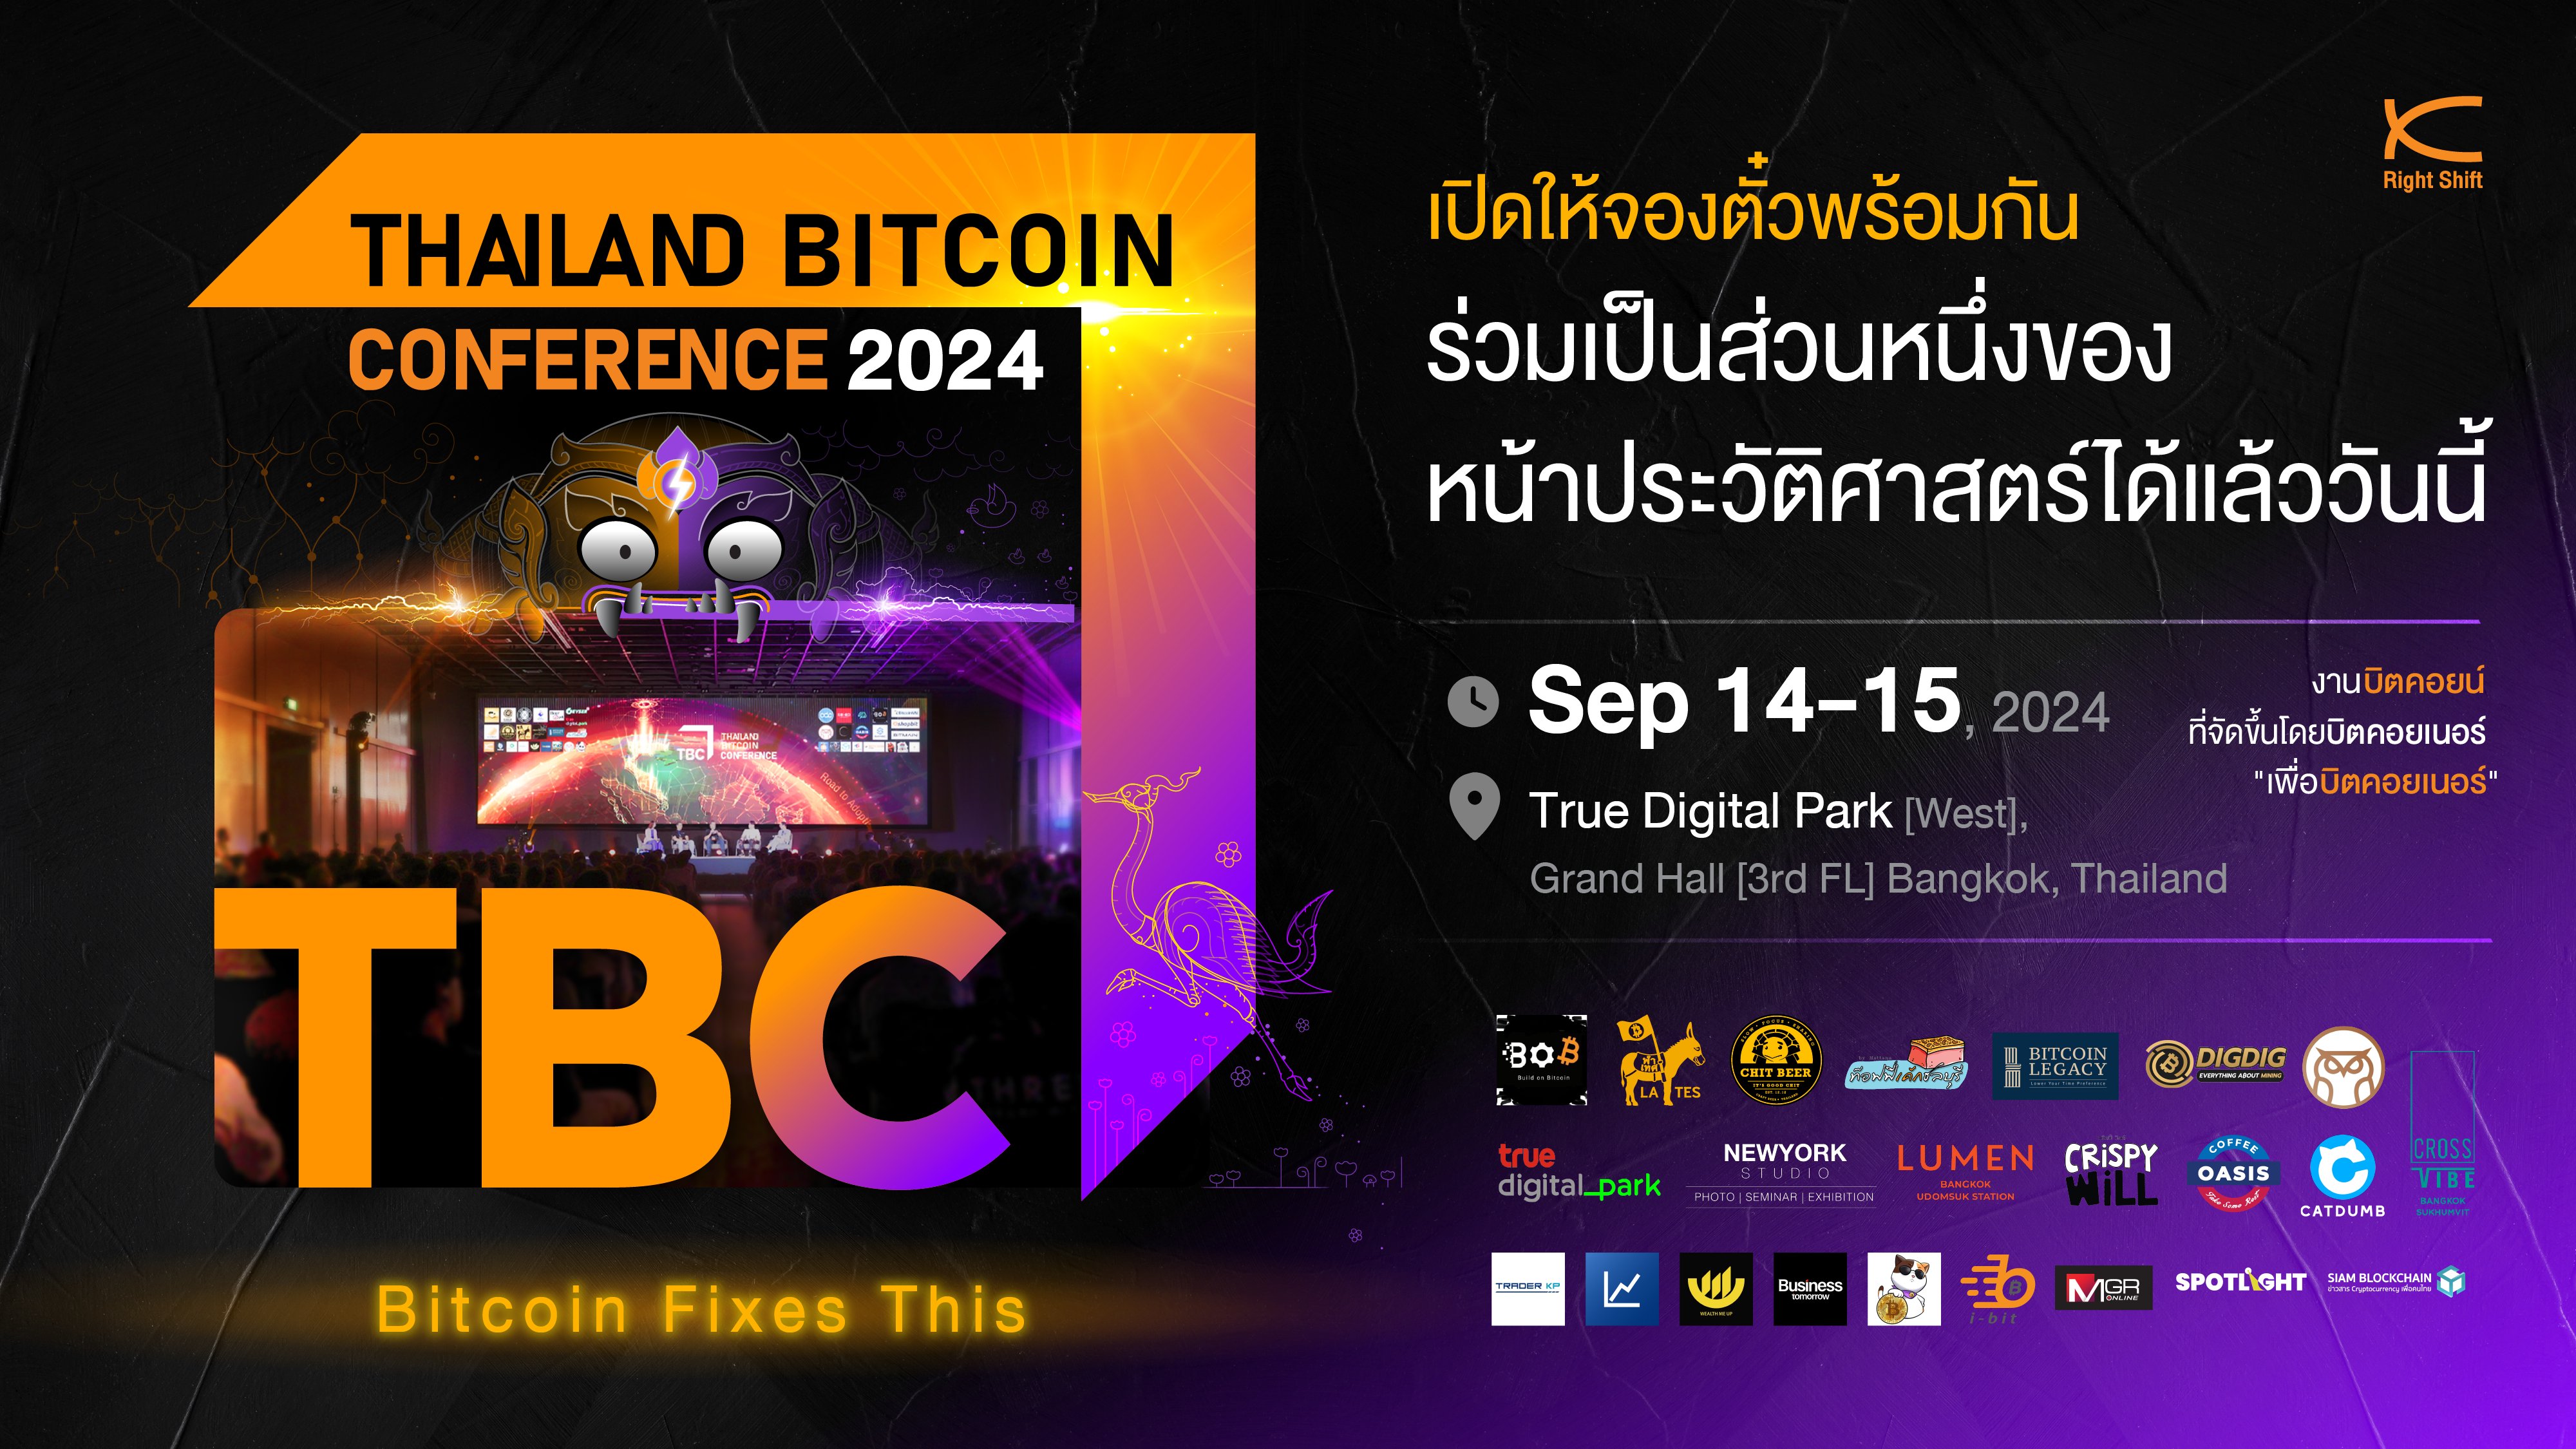 Thailand Bitcoin Conference 2024 